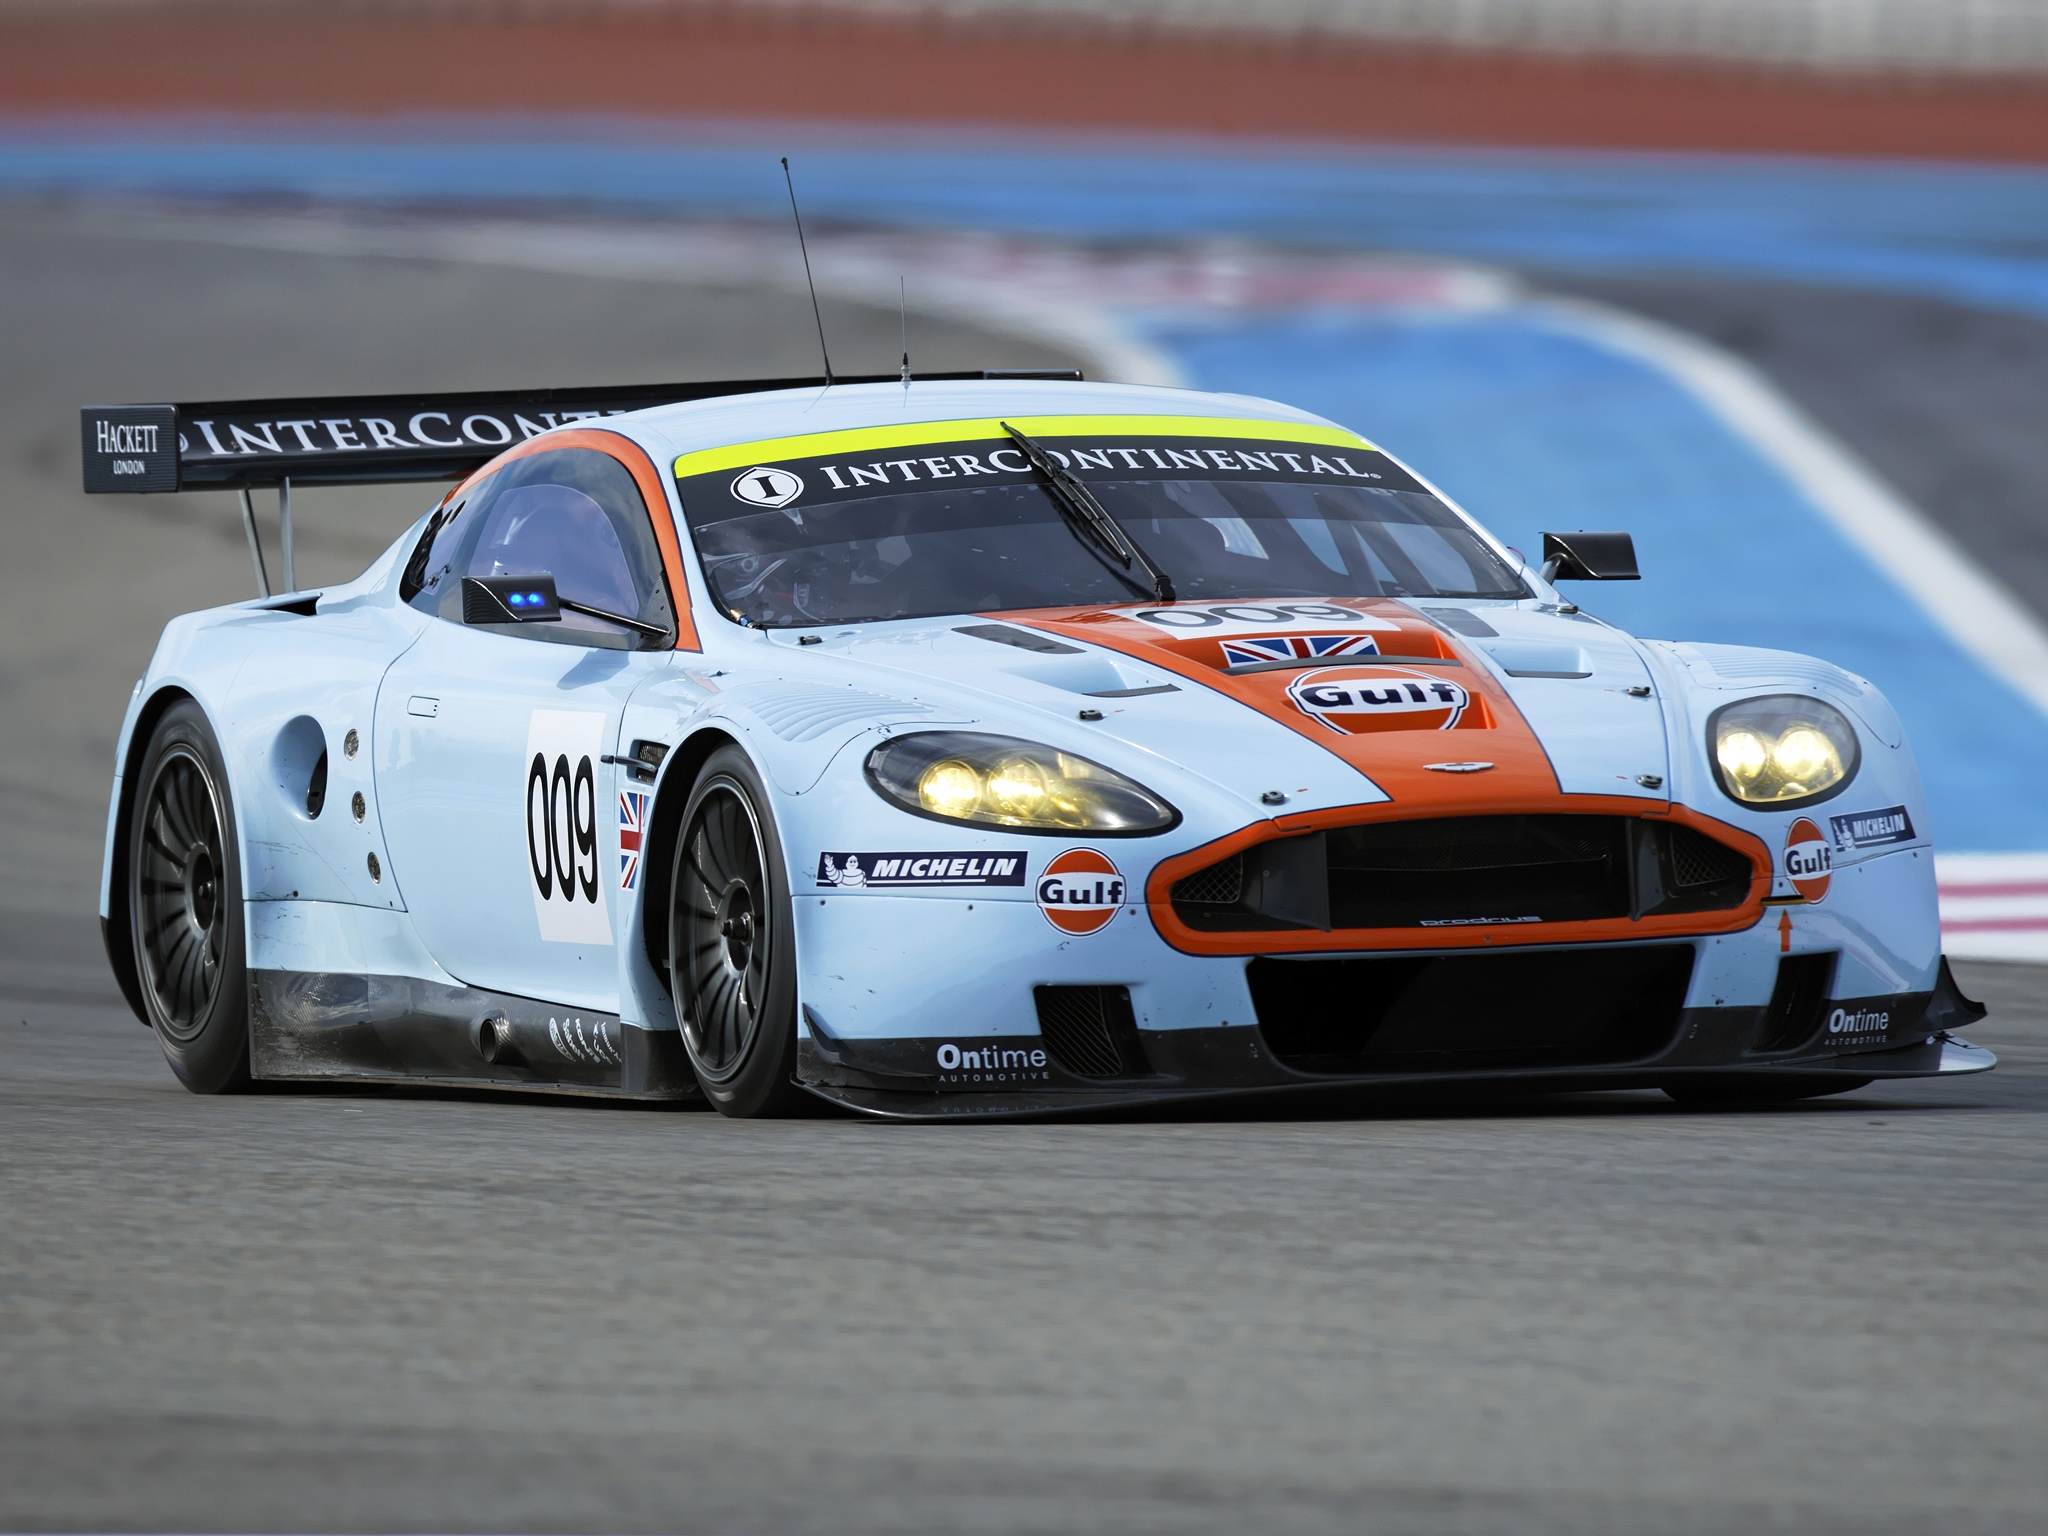 cars, sports, auto, aston martin, white, front view, style, 2008, track, racing car, route, dbr9 2160p